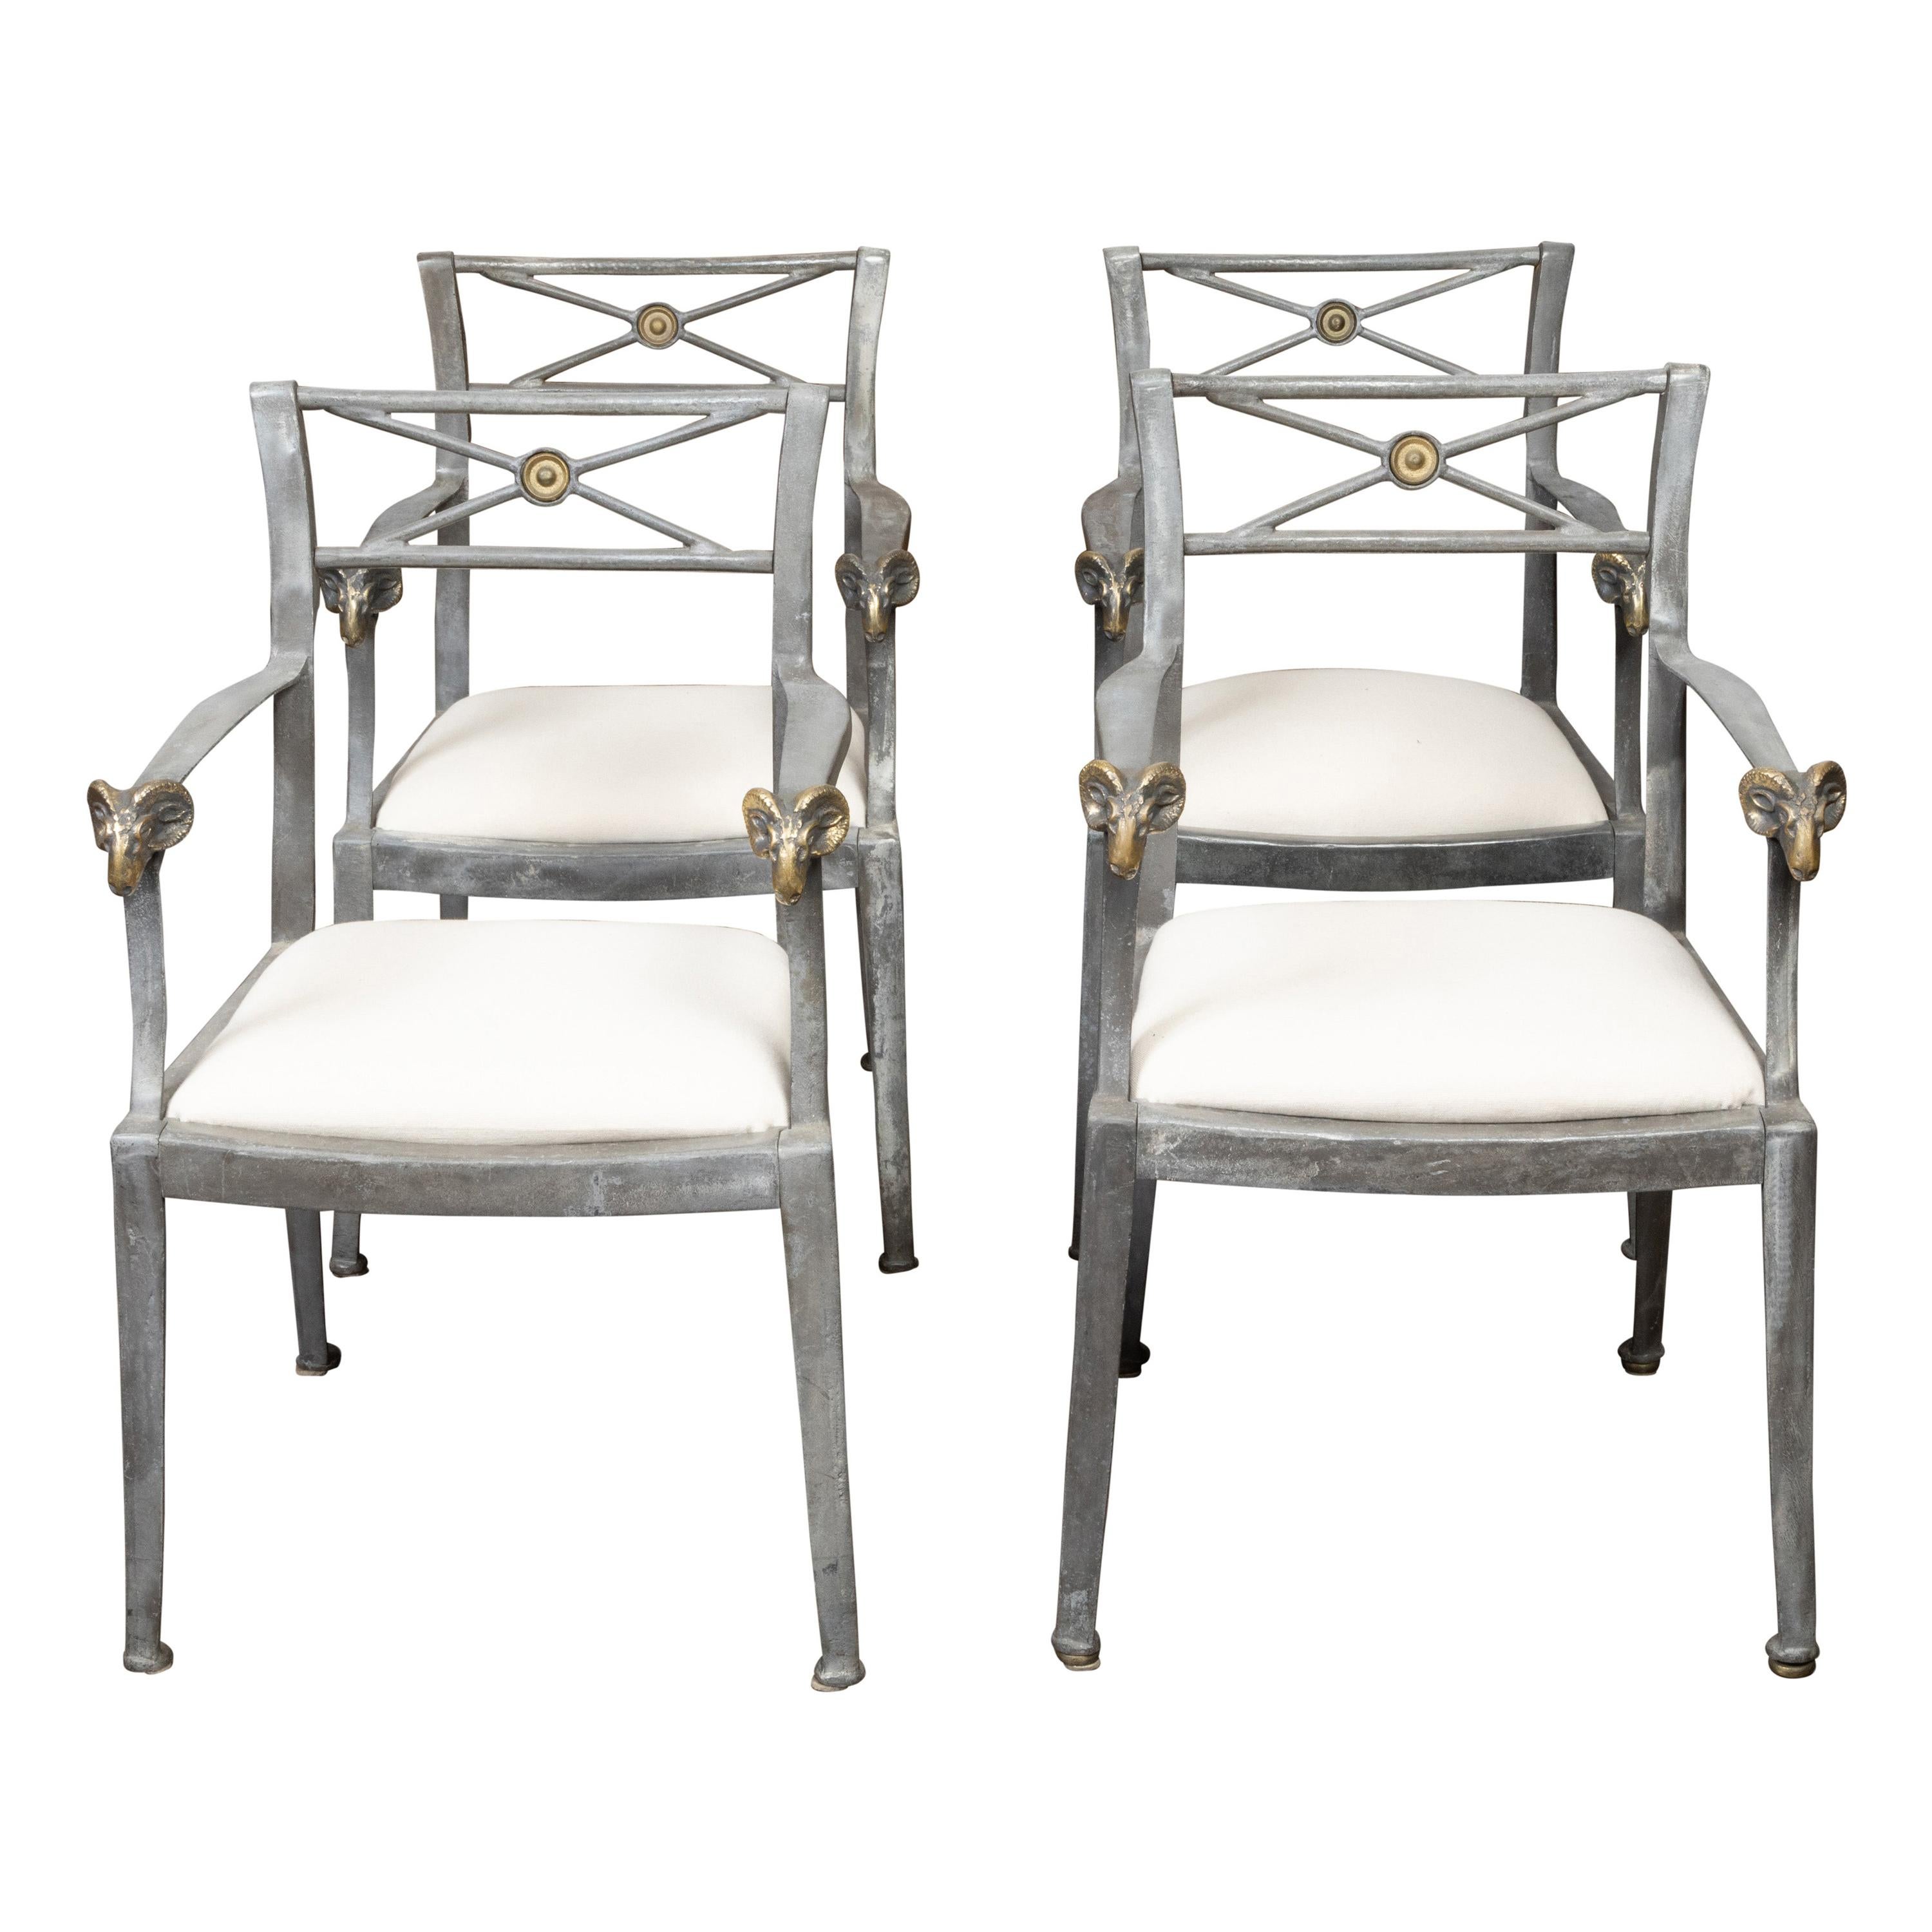 Set of Four Midcentury Italian Metal Armchairs with Brass Rams' Heads